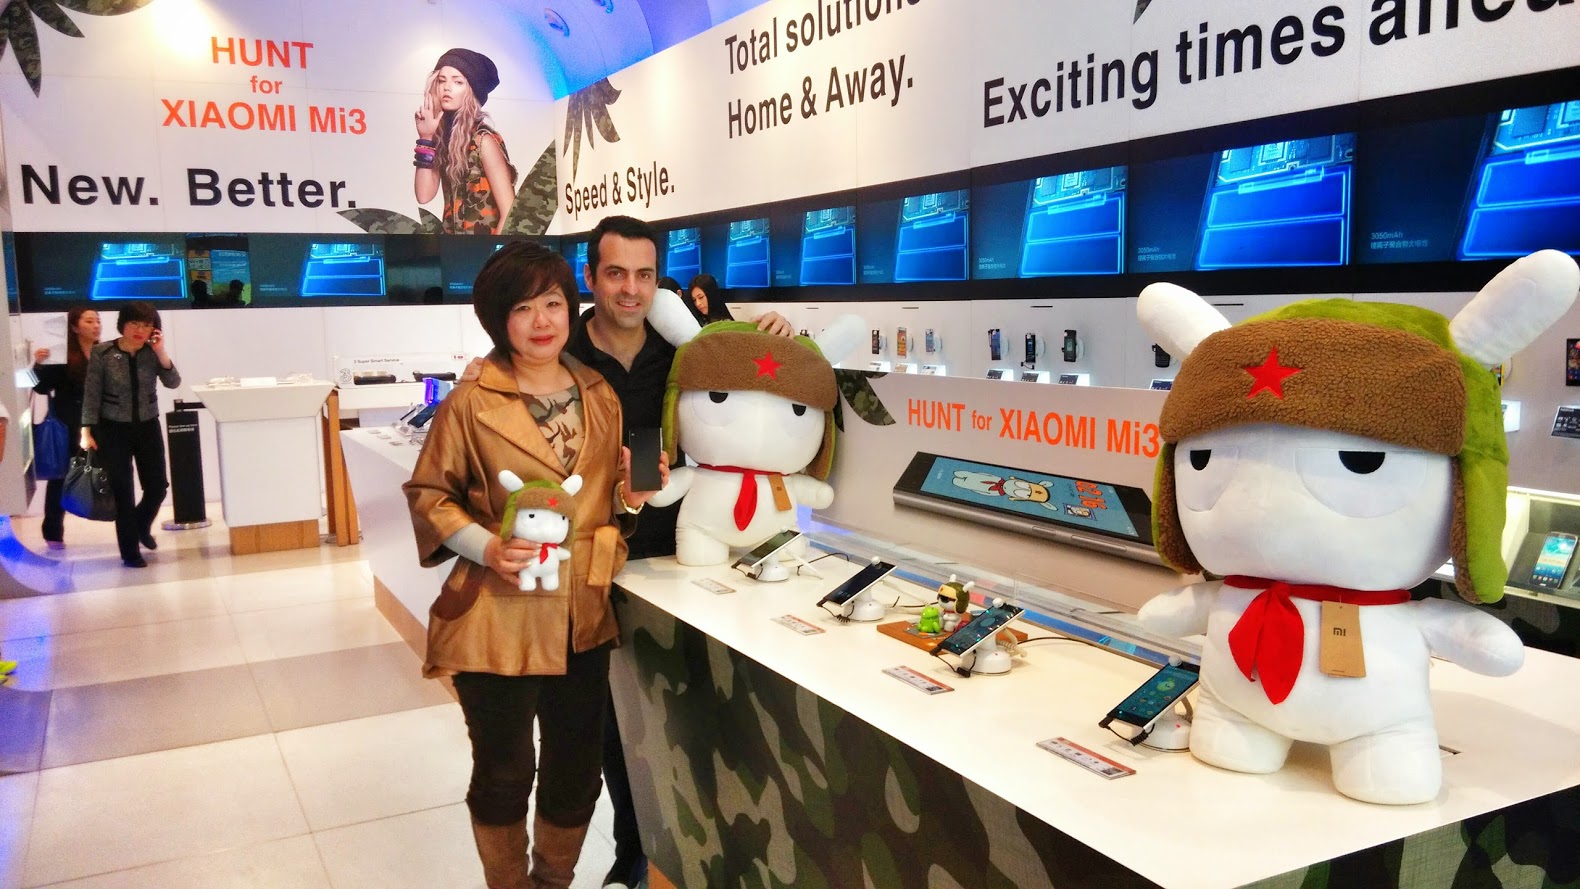 One of the stores where Three will promote Xiaomi's products